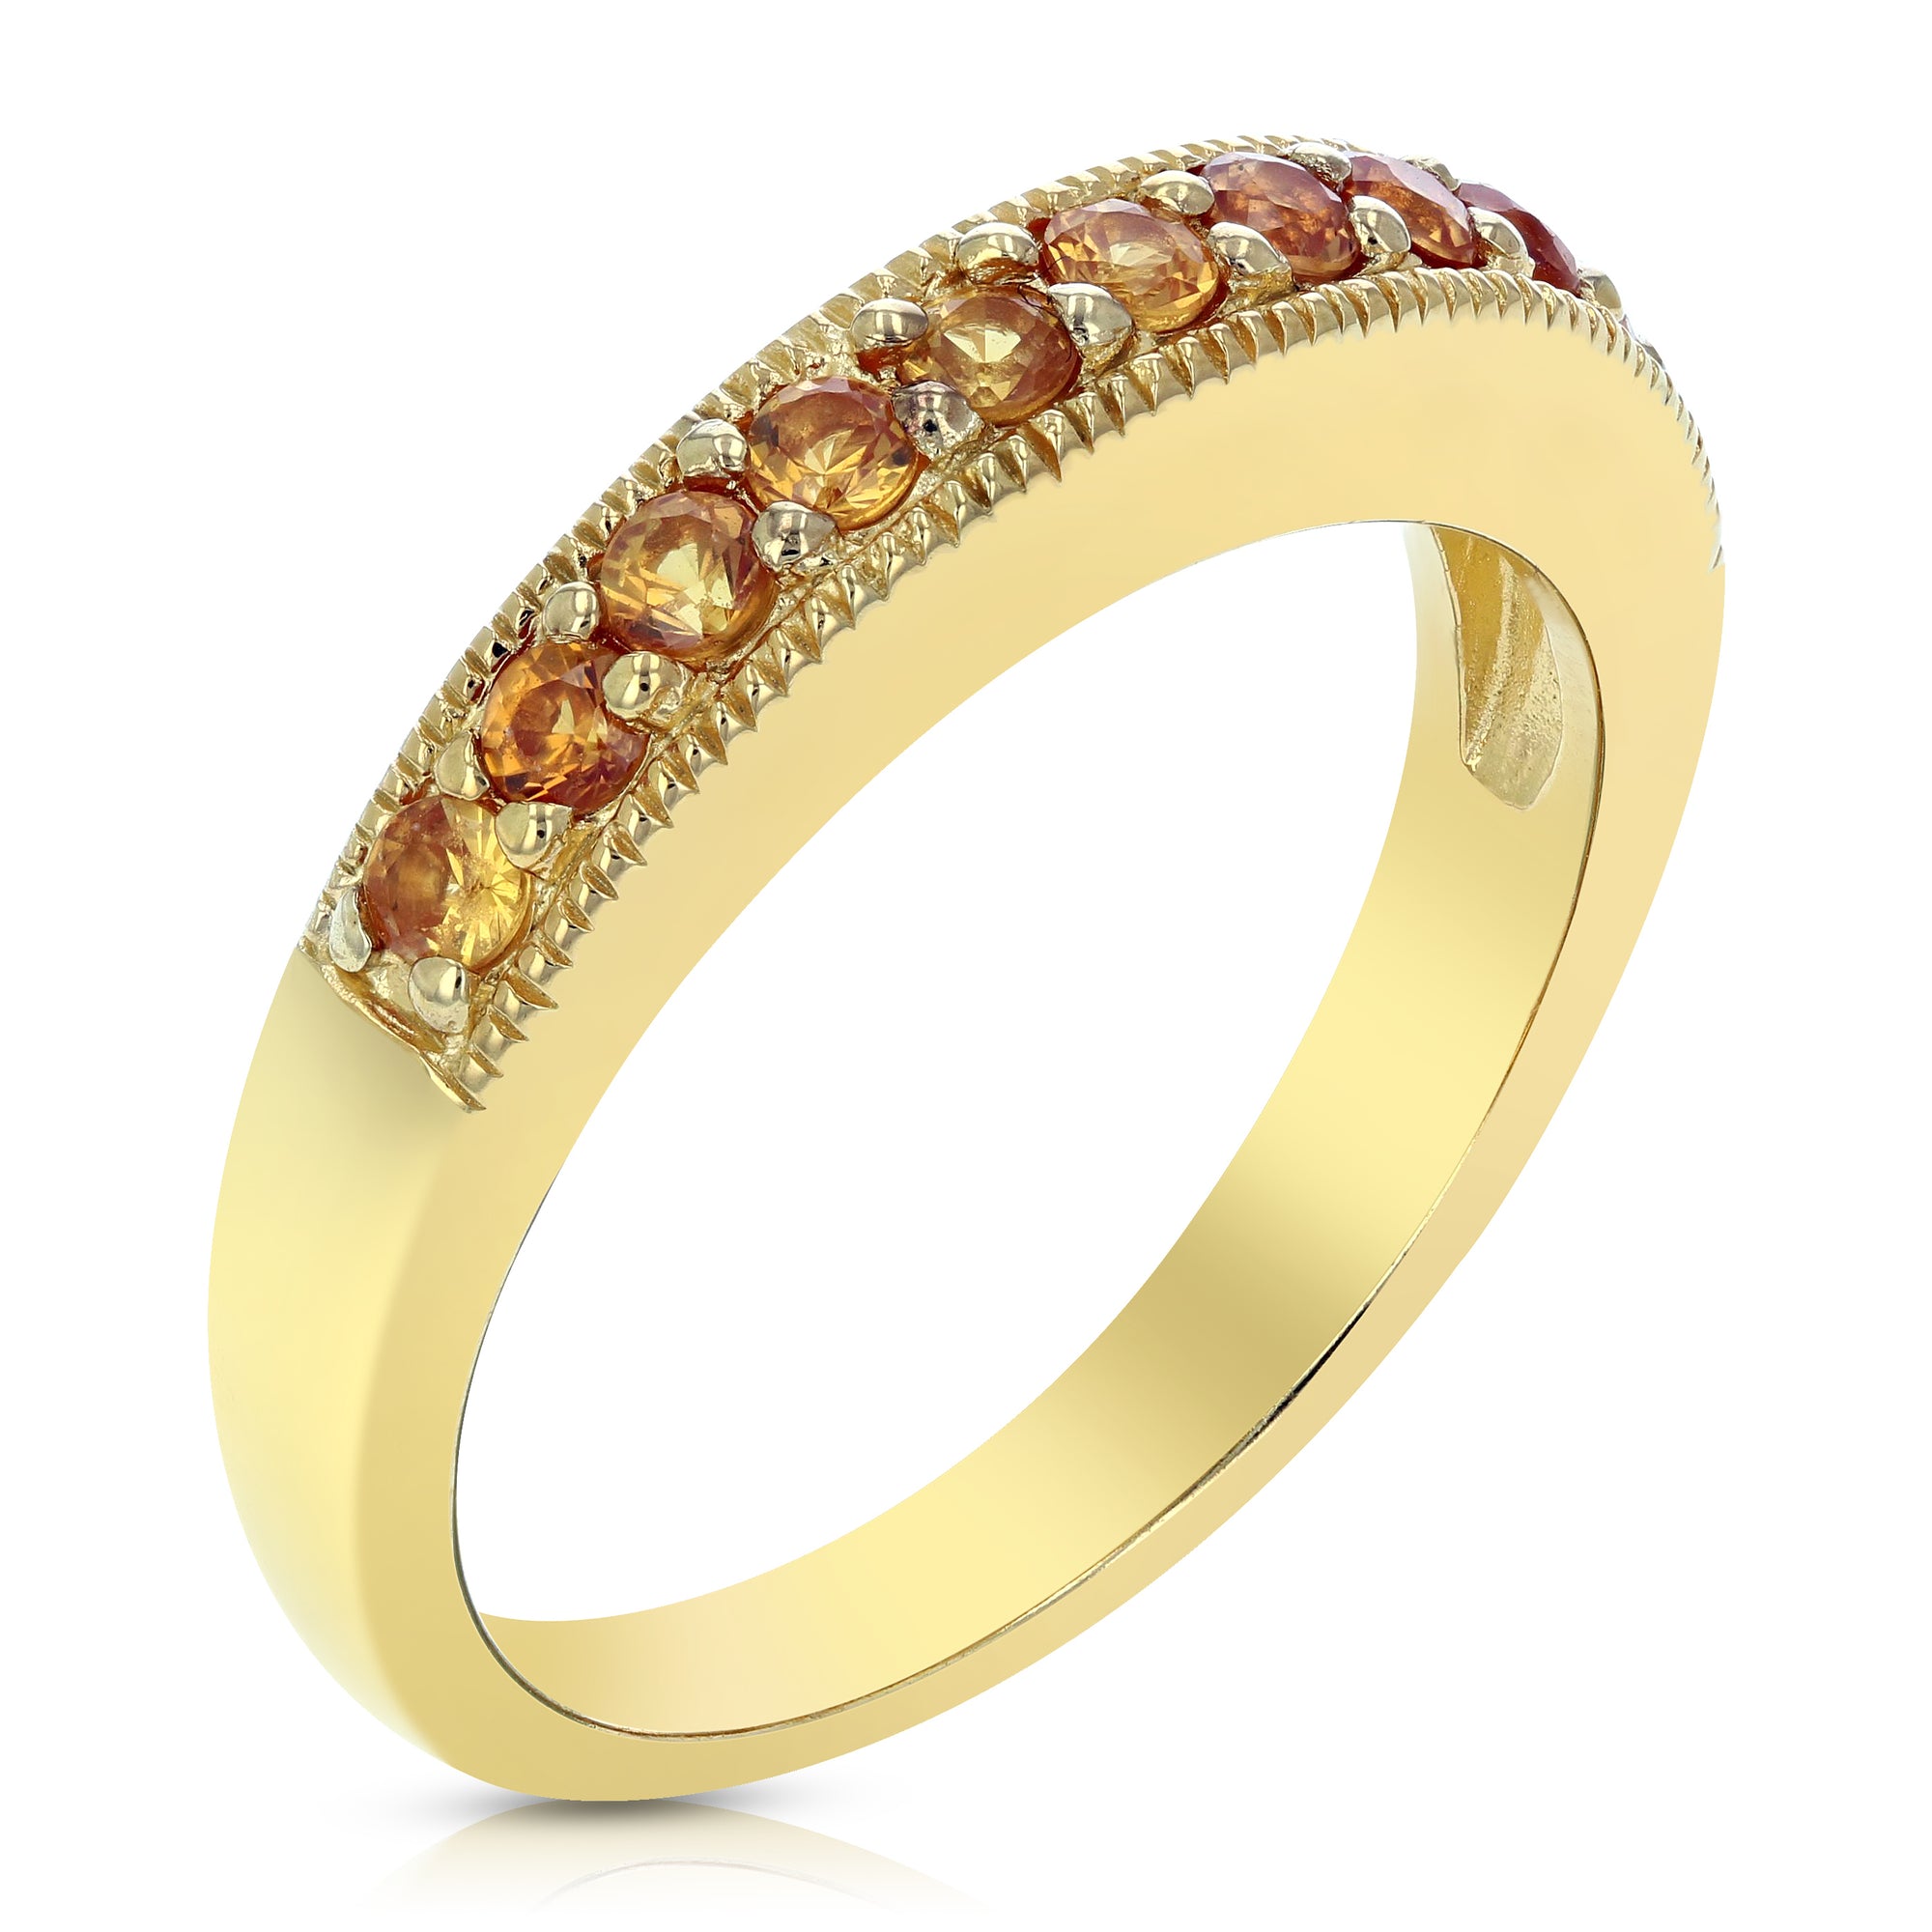 1/2 cttw Orange Sapphire Wedding Band Yellow Gold Plated over Silver Milgrain